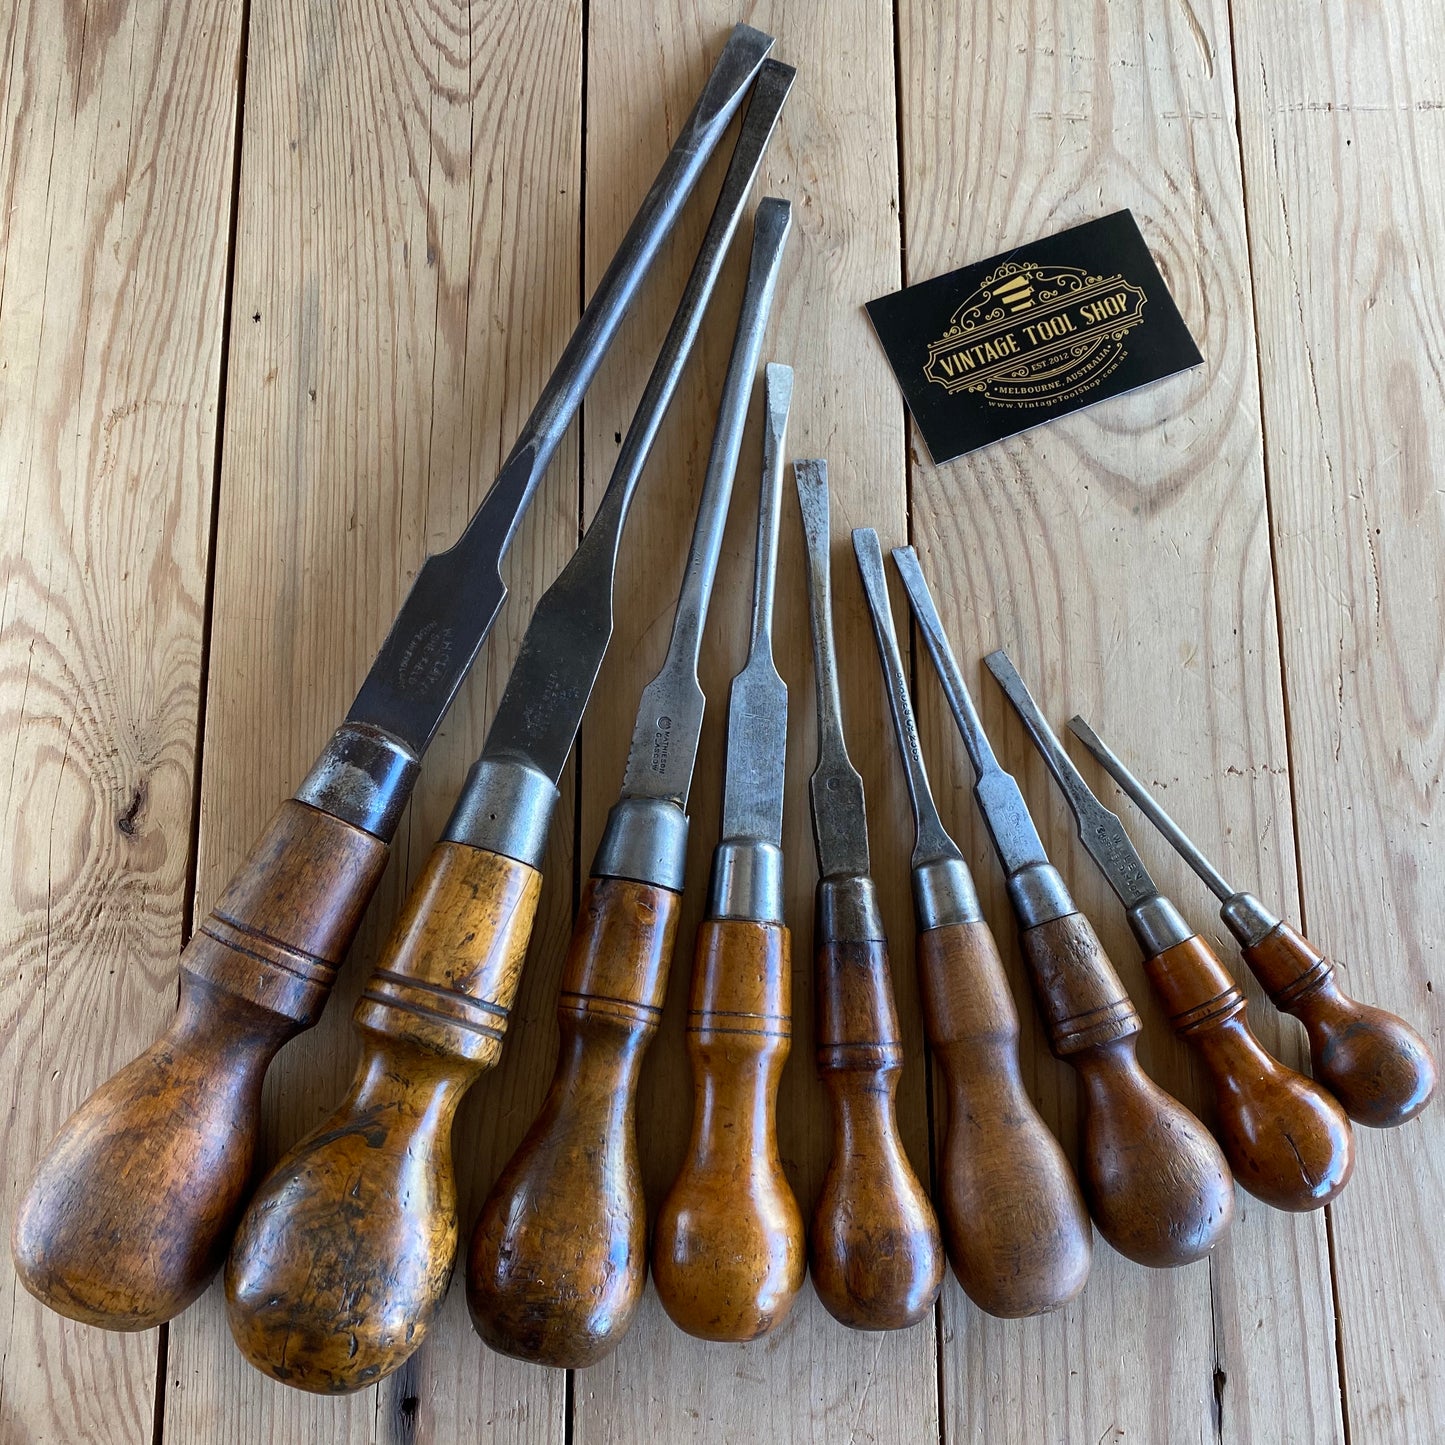 SOLD Vintage mix set of 9x English & Scottish cabinetmakers SCREWDRIVERS T10007